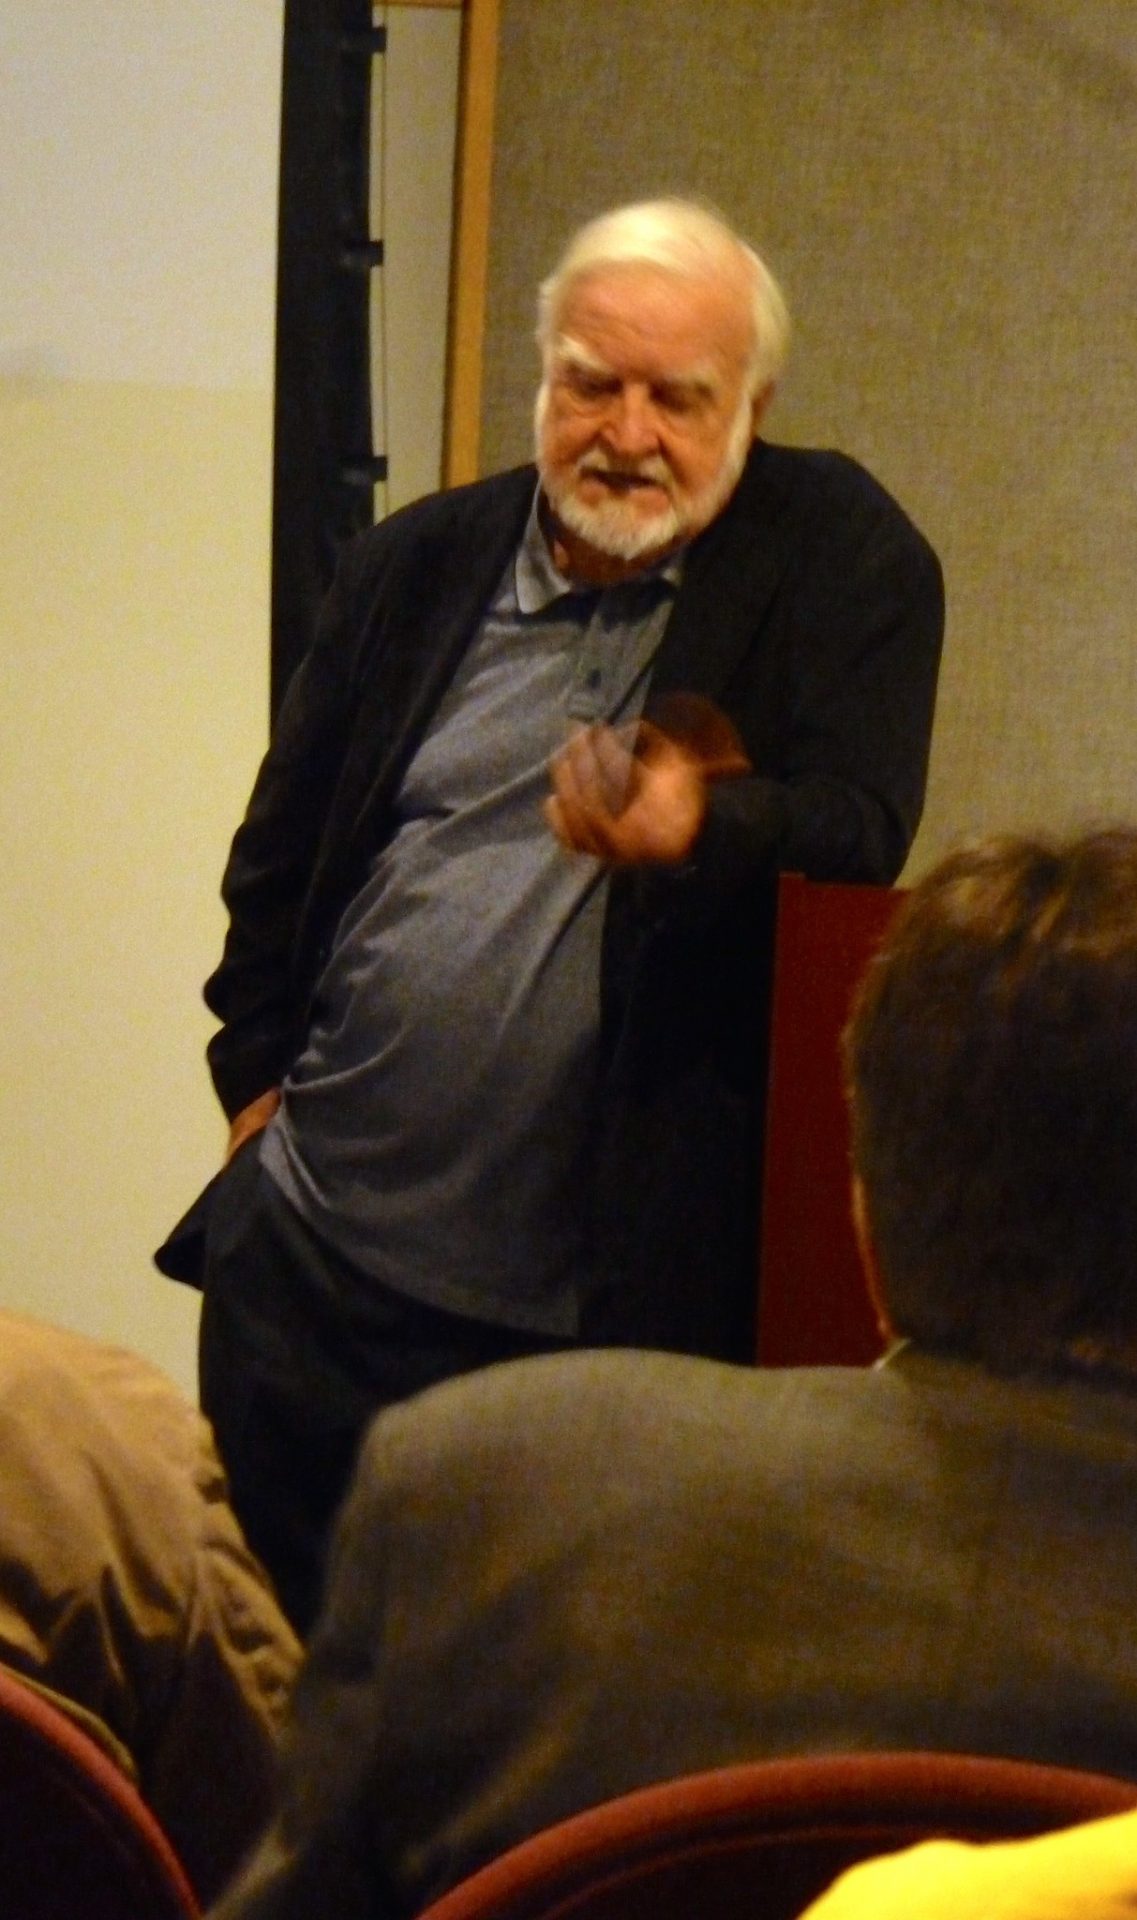 Hungarian-American psychologist Mihaly Csikszentmihalyi dies aged 87